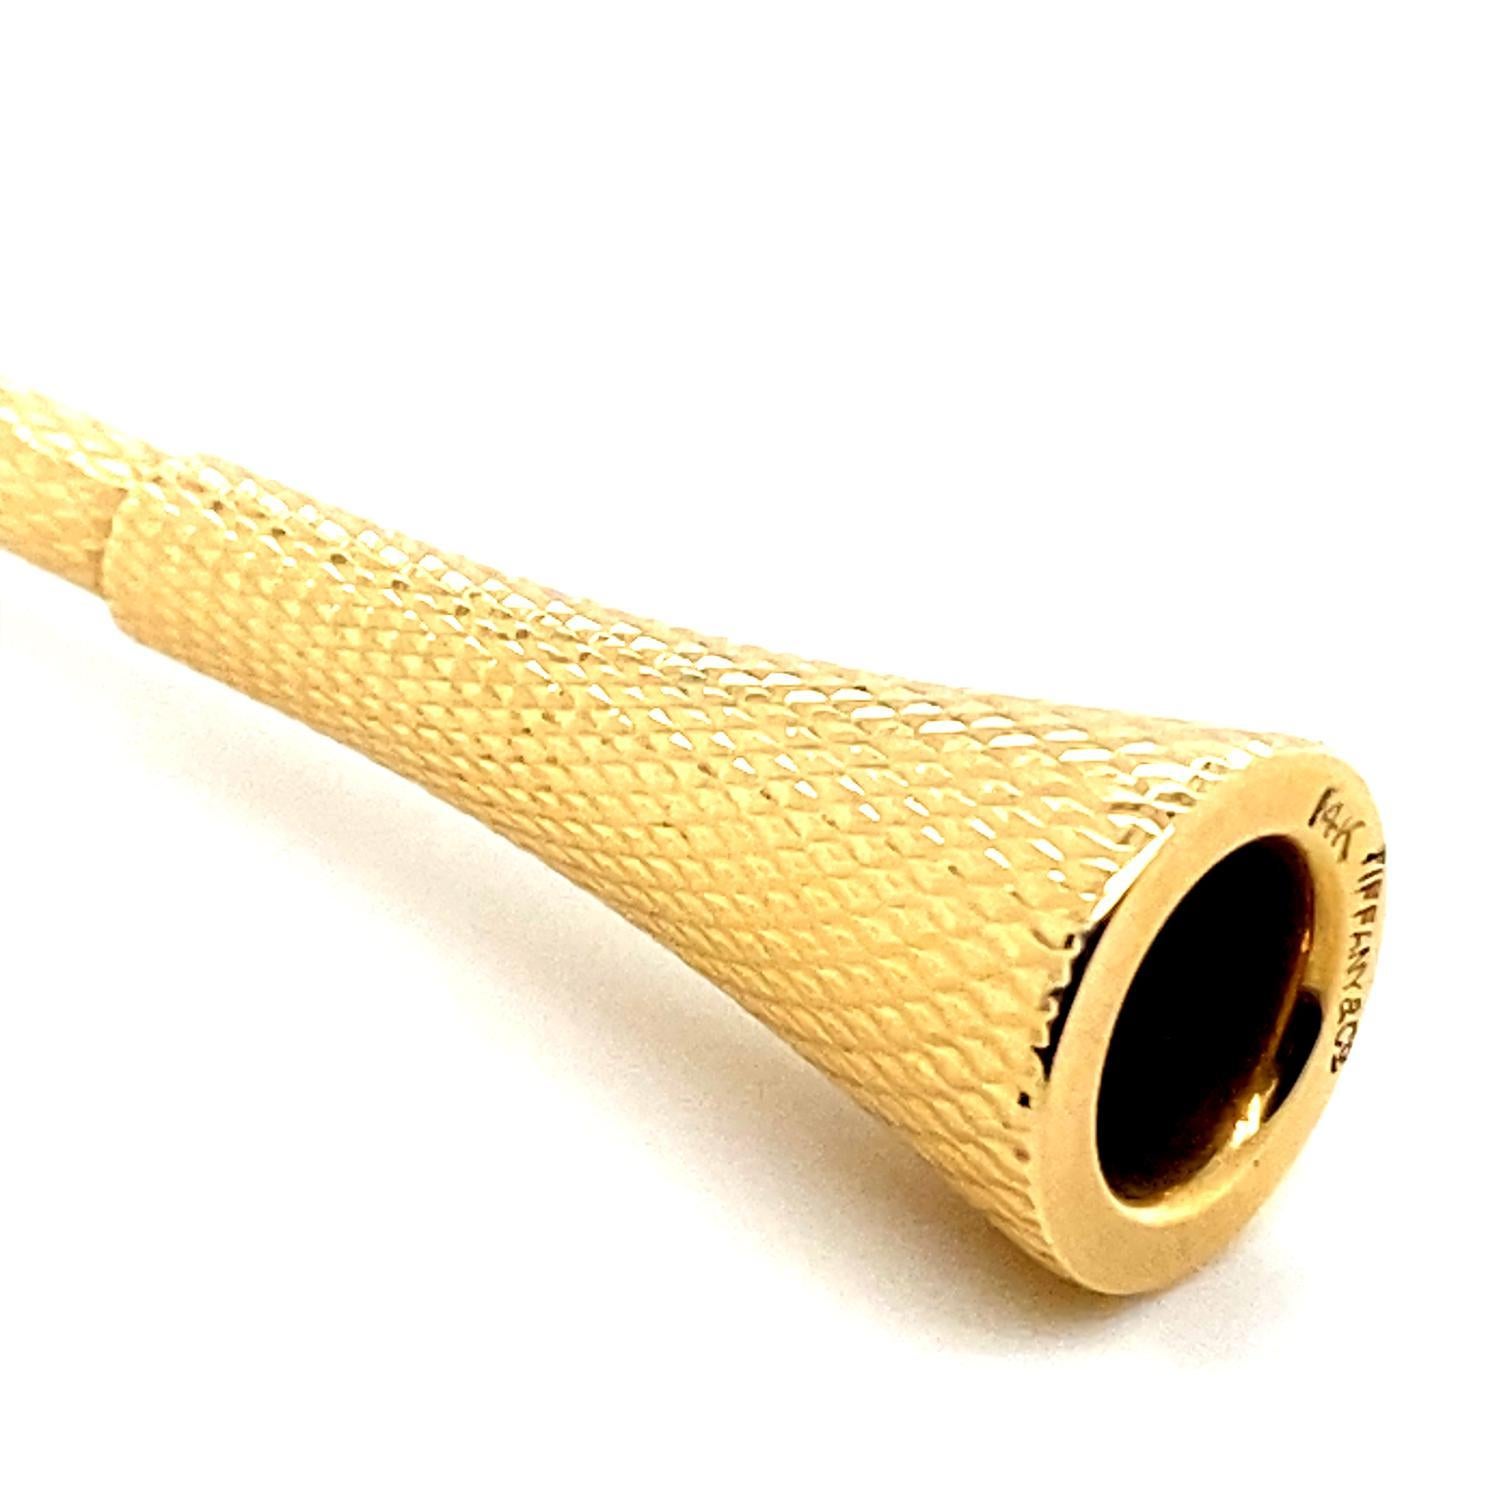 Tiffany & Co. Vintage Cigarette Holder 14 Karat Yellow Gold In Good Condition For Sale In London, GB